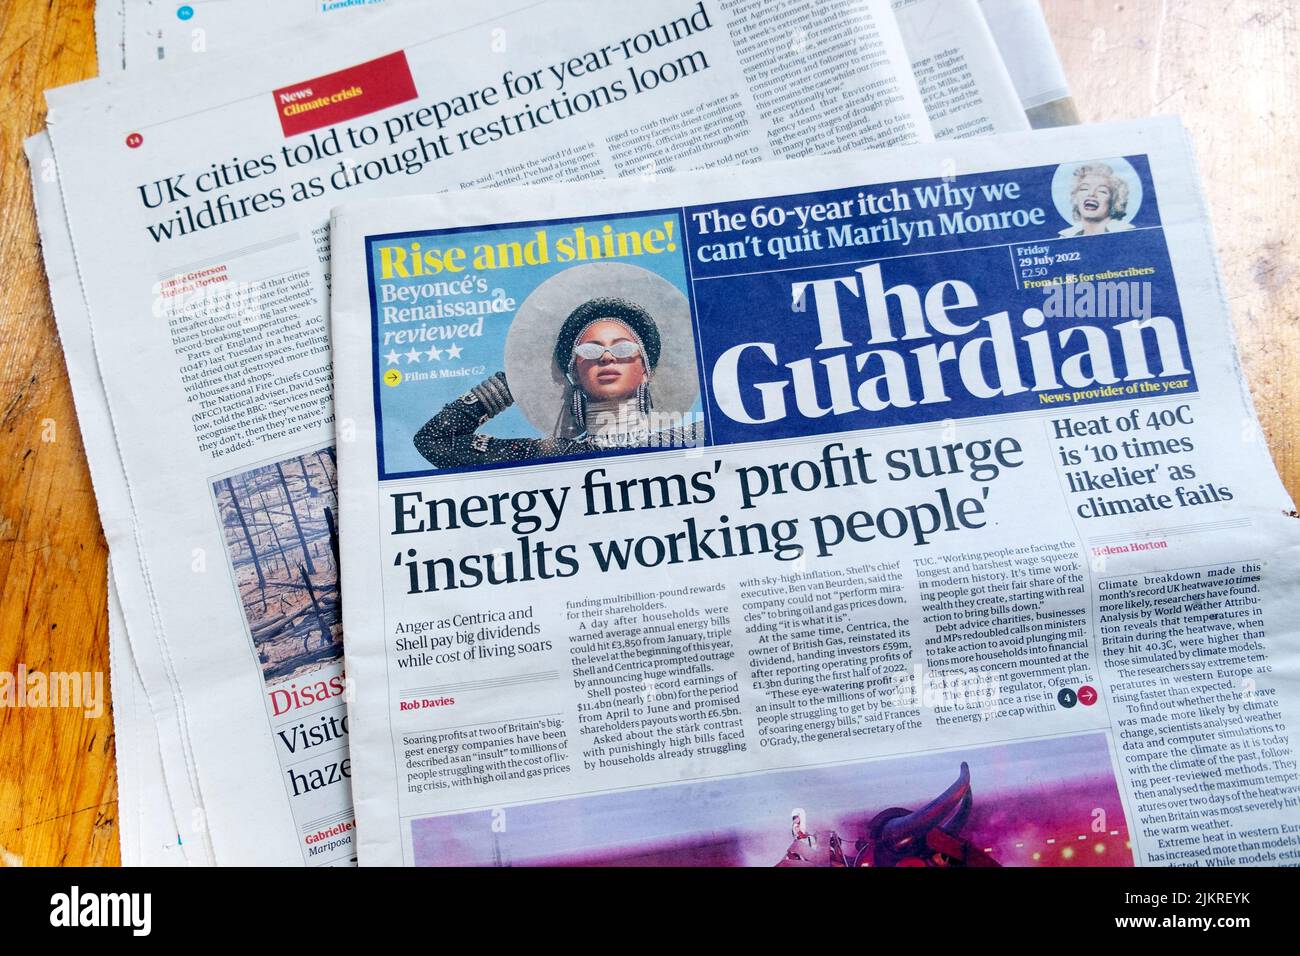 Energy firms' profit surge 'insults working people' The Guardian newspaper headline front page on 29 July 2022 in London UK Great Britain Stock Photo